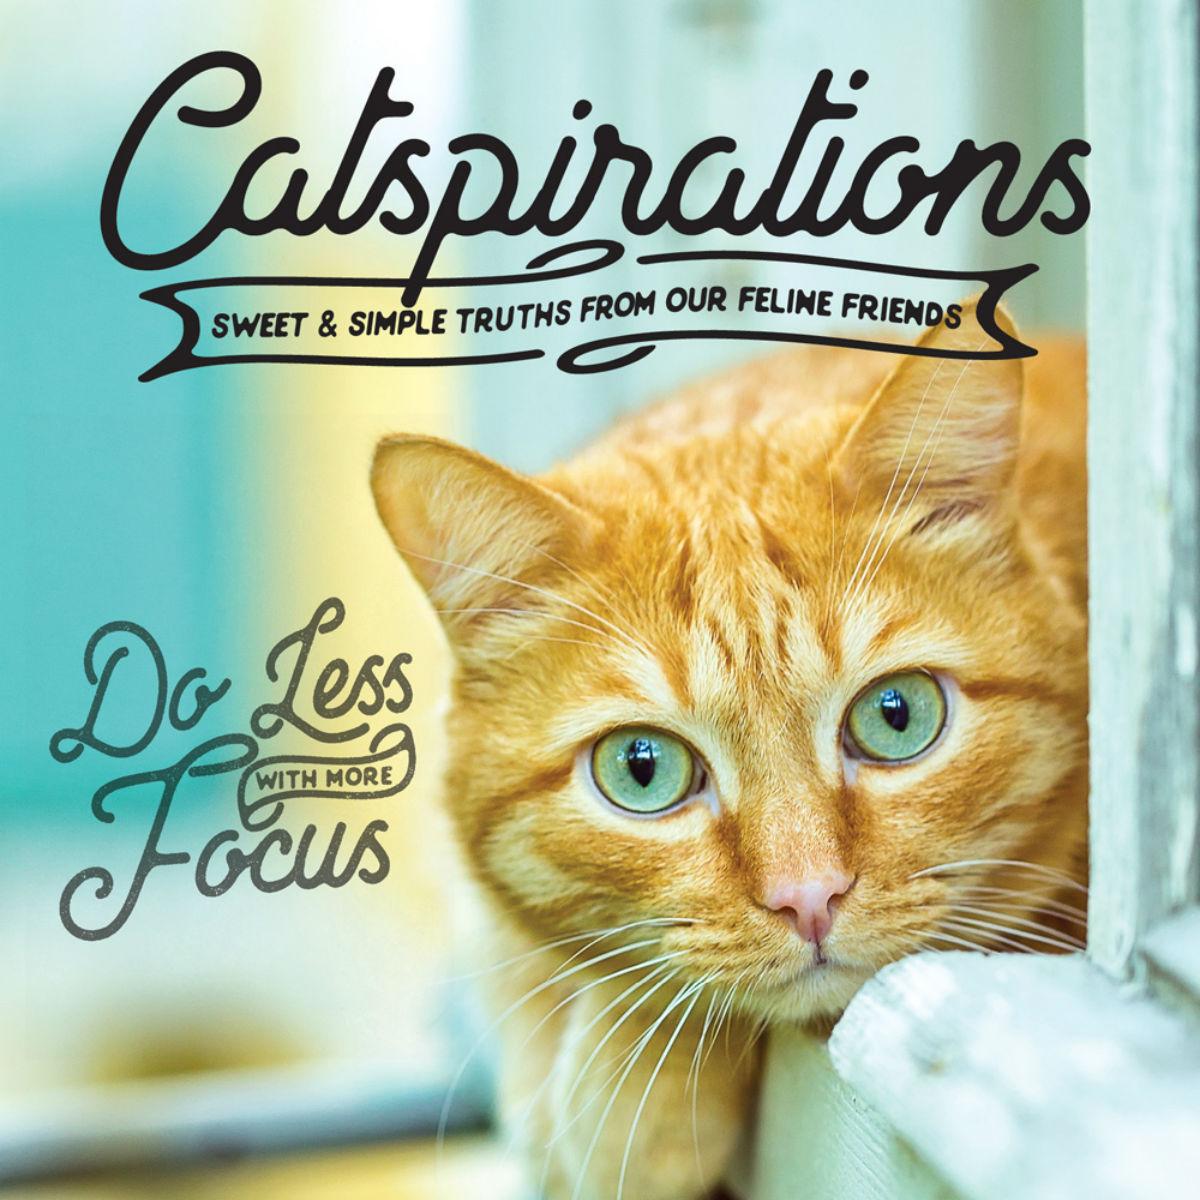 Catspirations Book for Human; Sweet and Simple Truths From Our Feline Friends